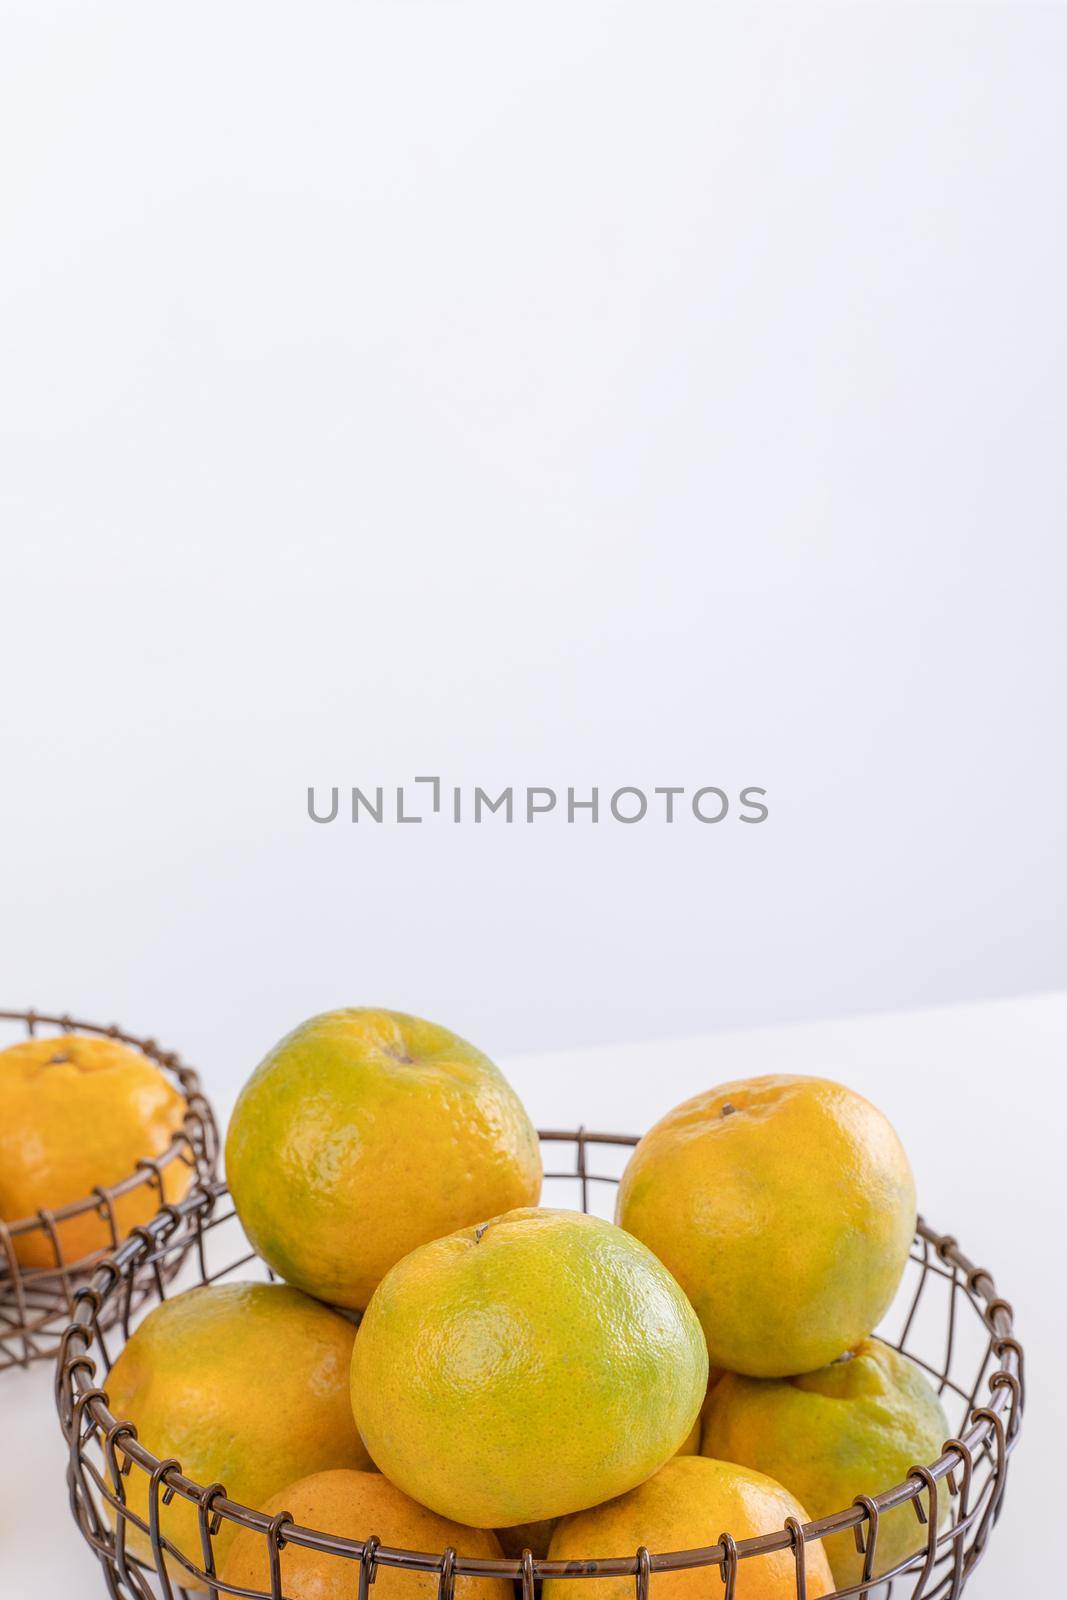 Beautiful peeled tangerines in a plate and metal basket isolated on bright white clean table in a modern contemporary kitchen island, close up.